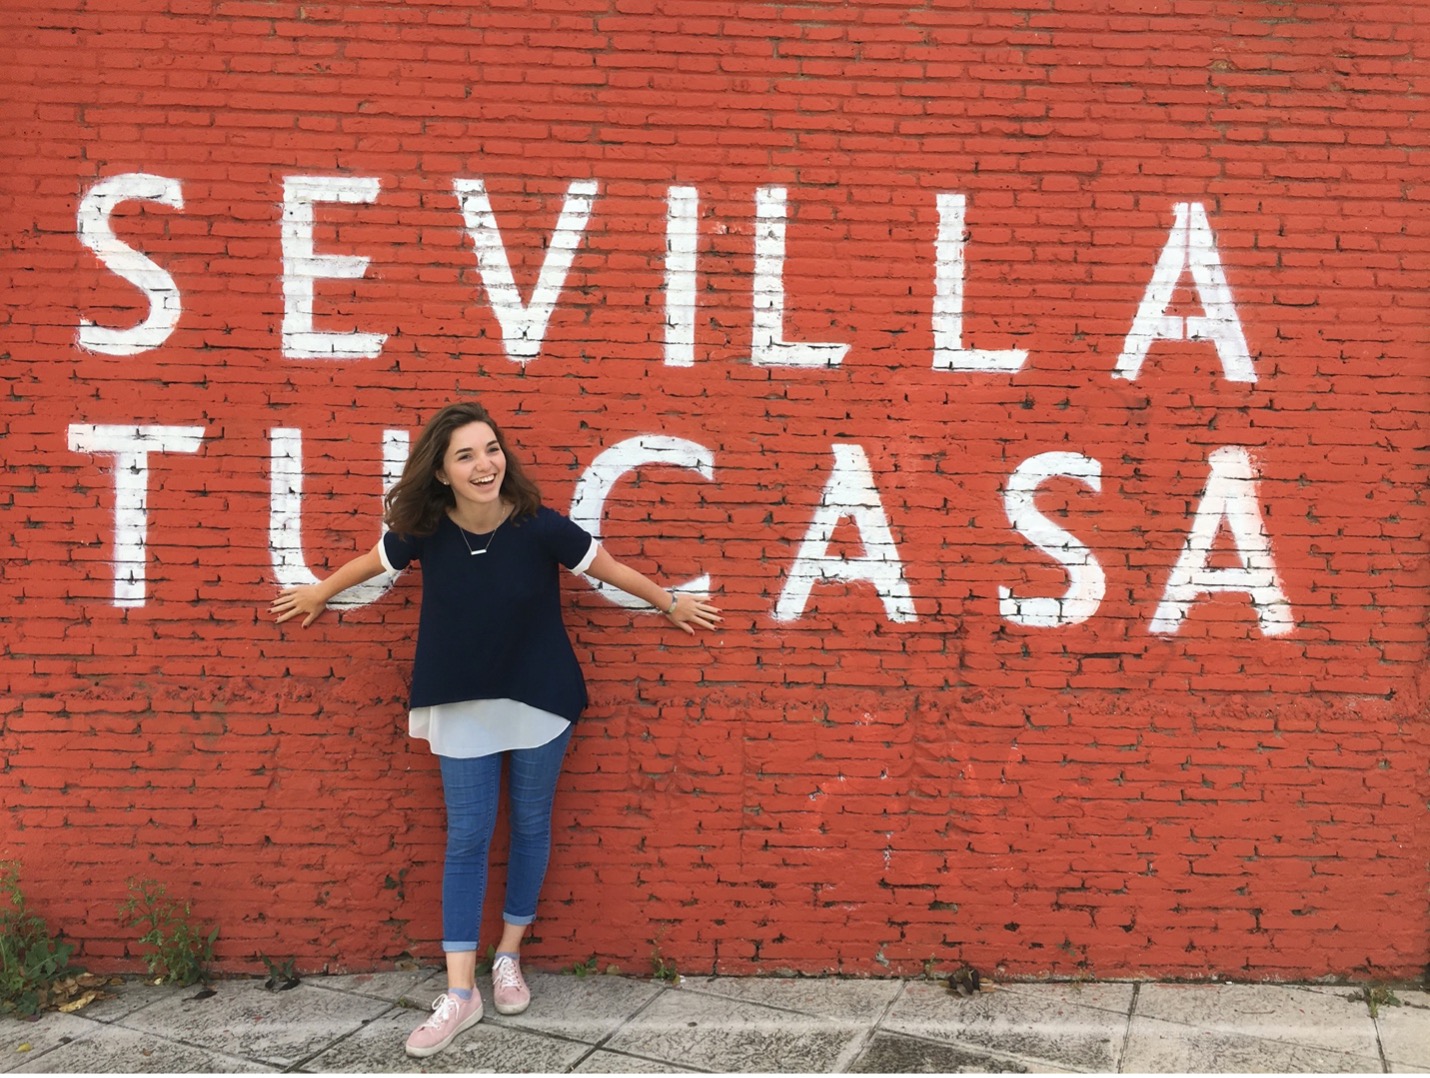 Joy Karges stands in front of wall in Sevilla, Spain.